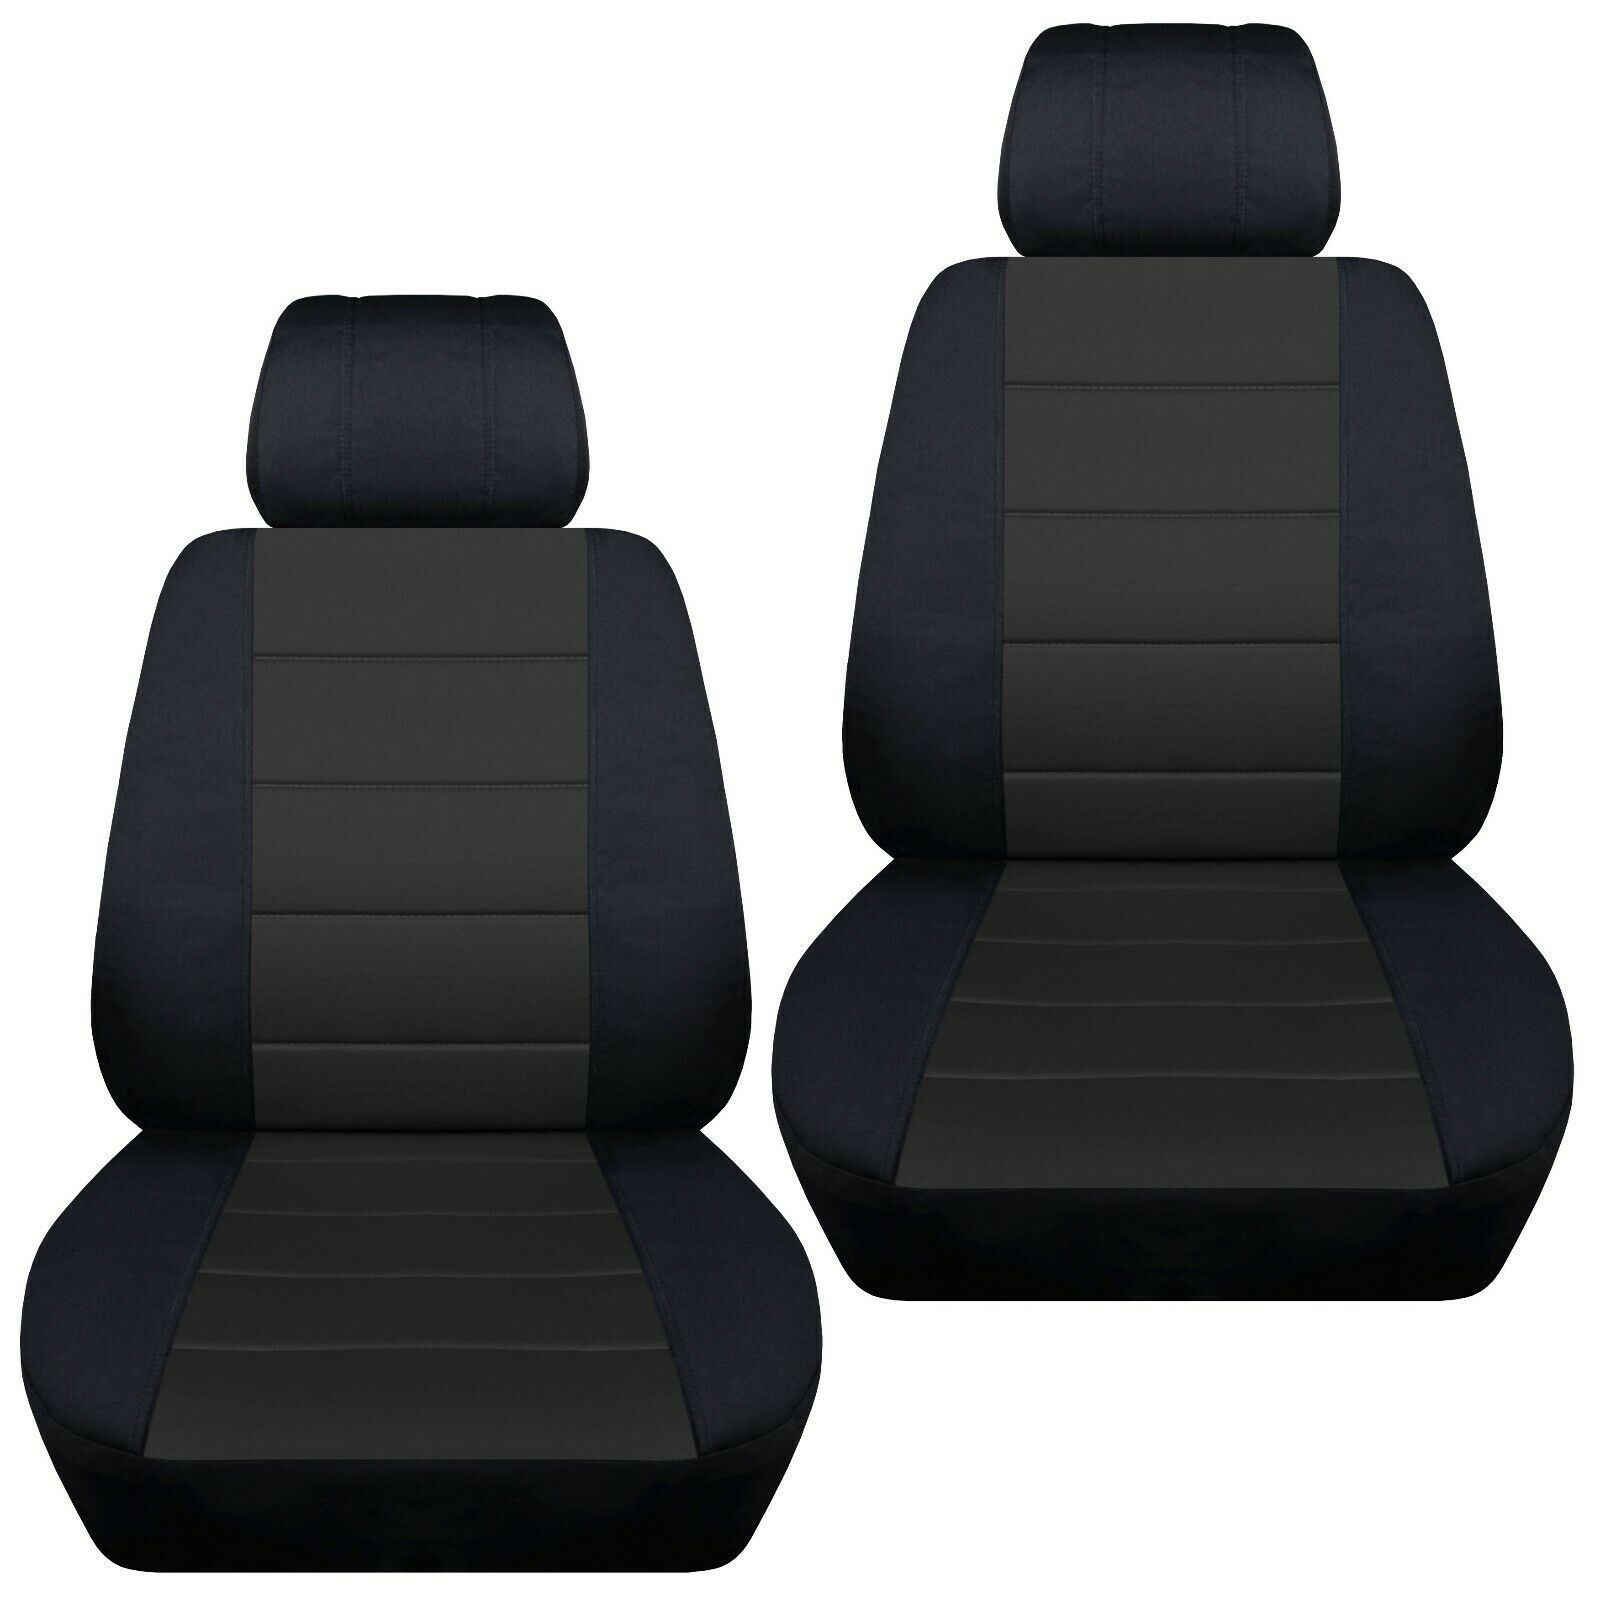 Designcovers - Front set car seat covers fits chevy equinox  2005-2020   black and charcoal